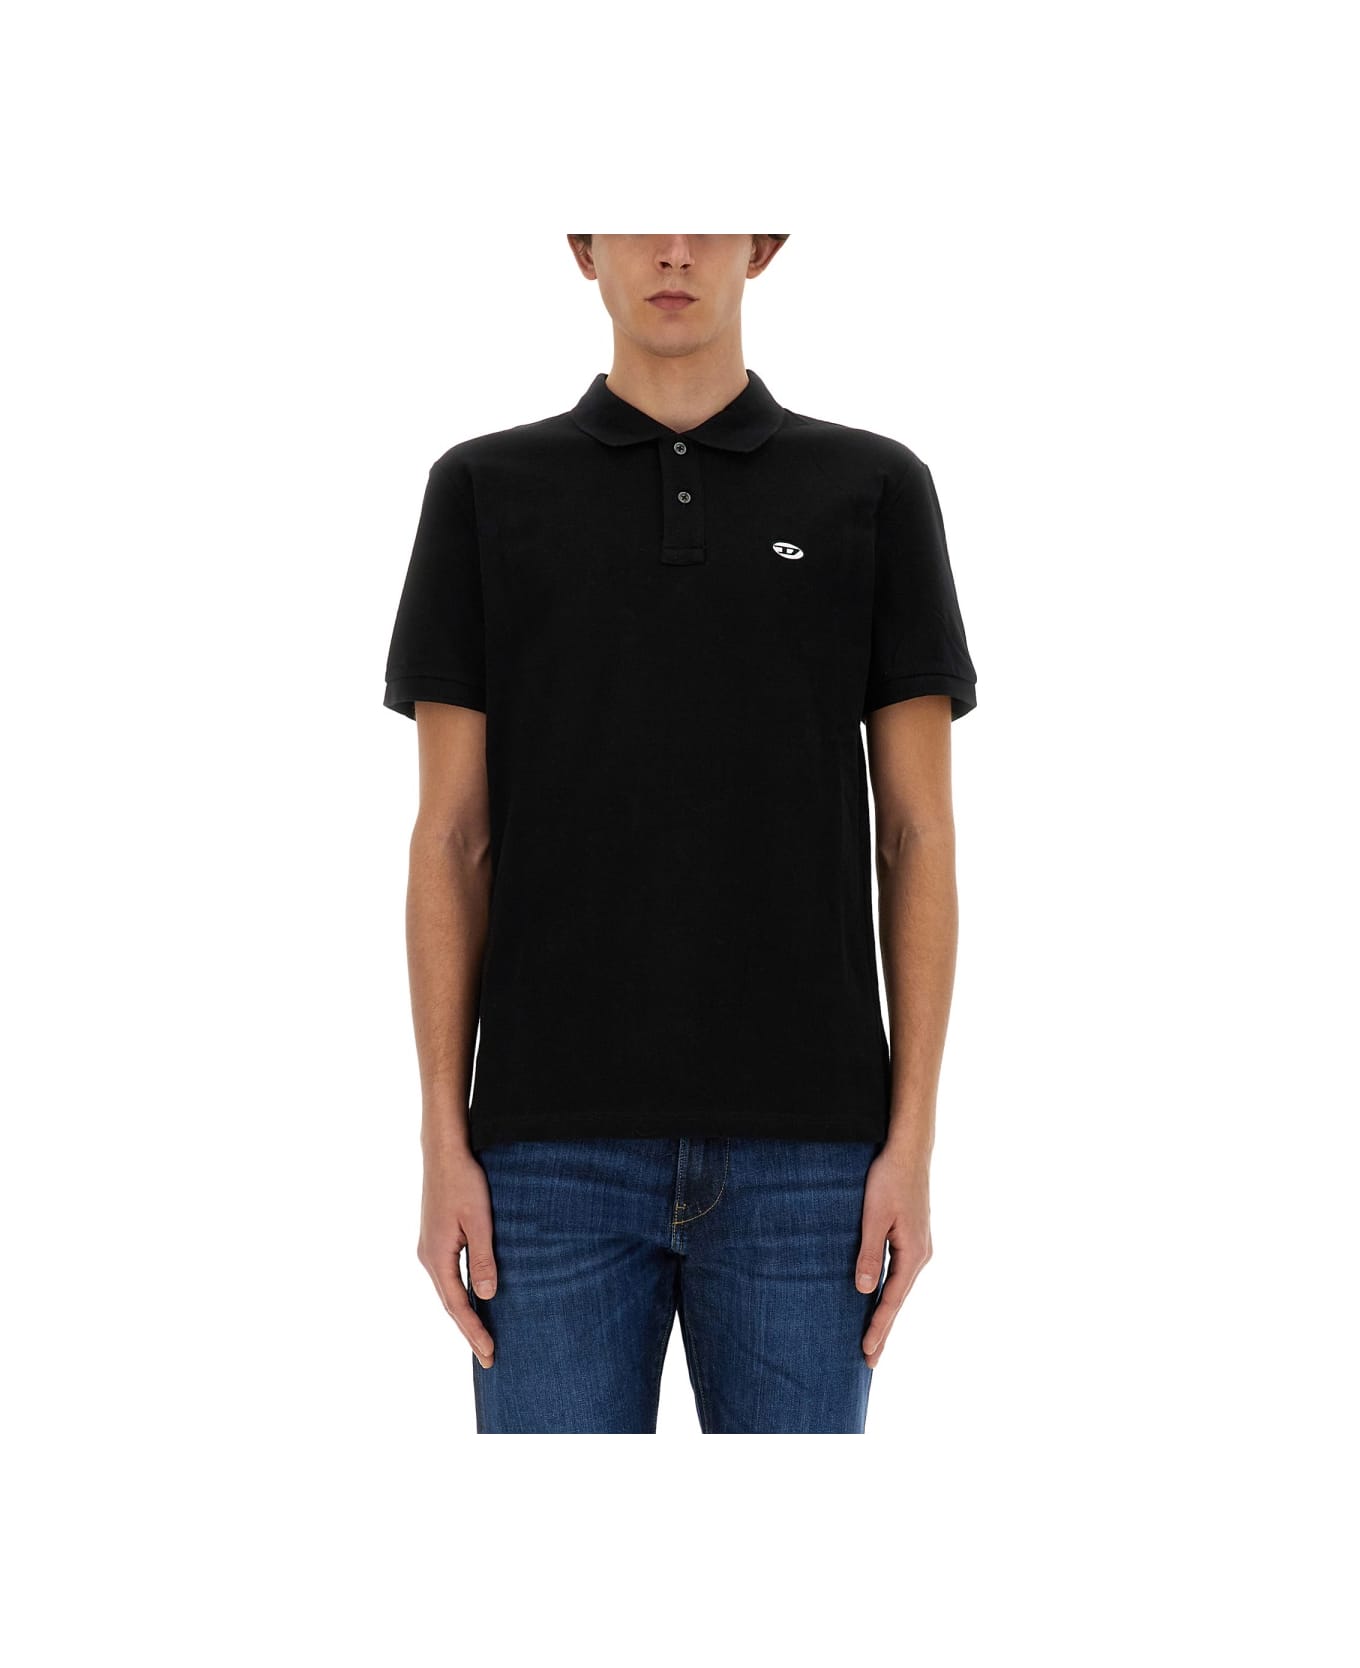 Diesel "t-smith-doval-pj" Polo Shirt - BLACK ポロシャツ